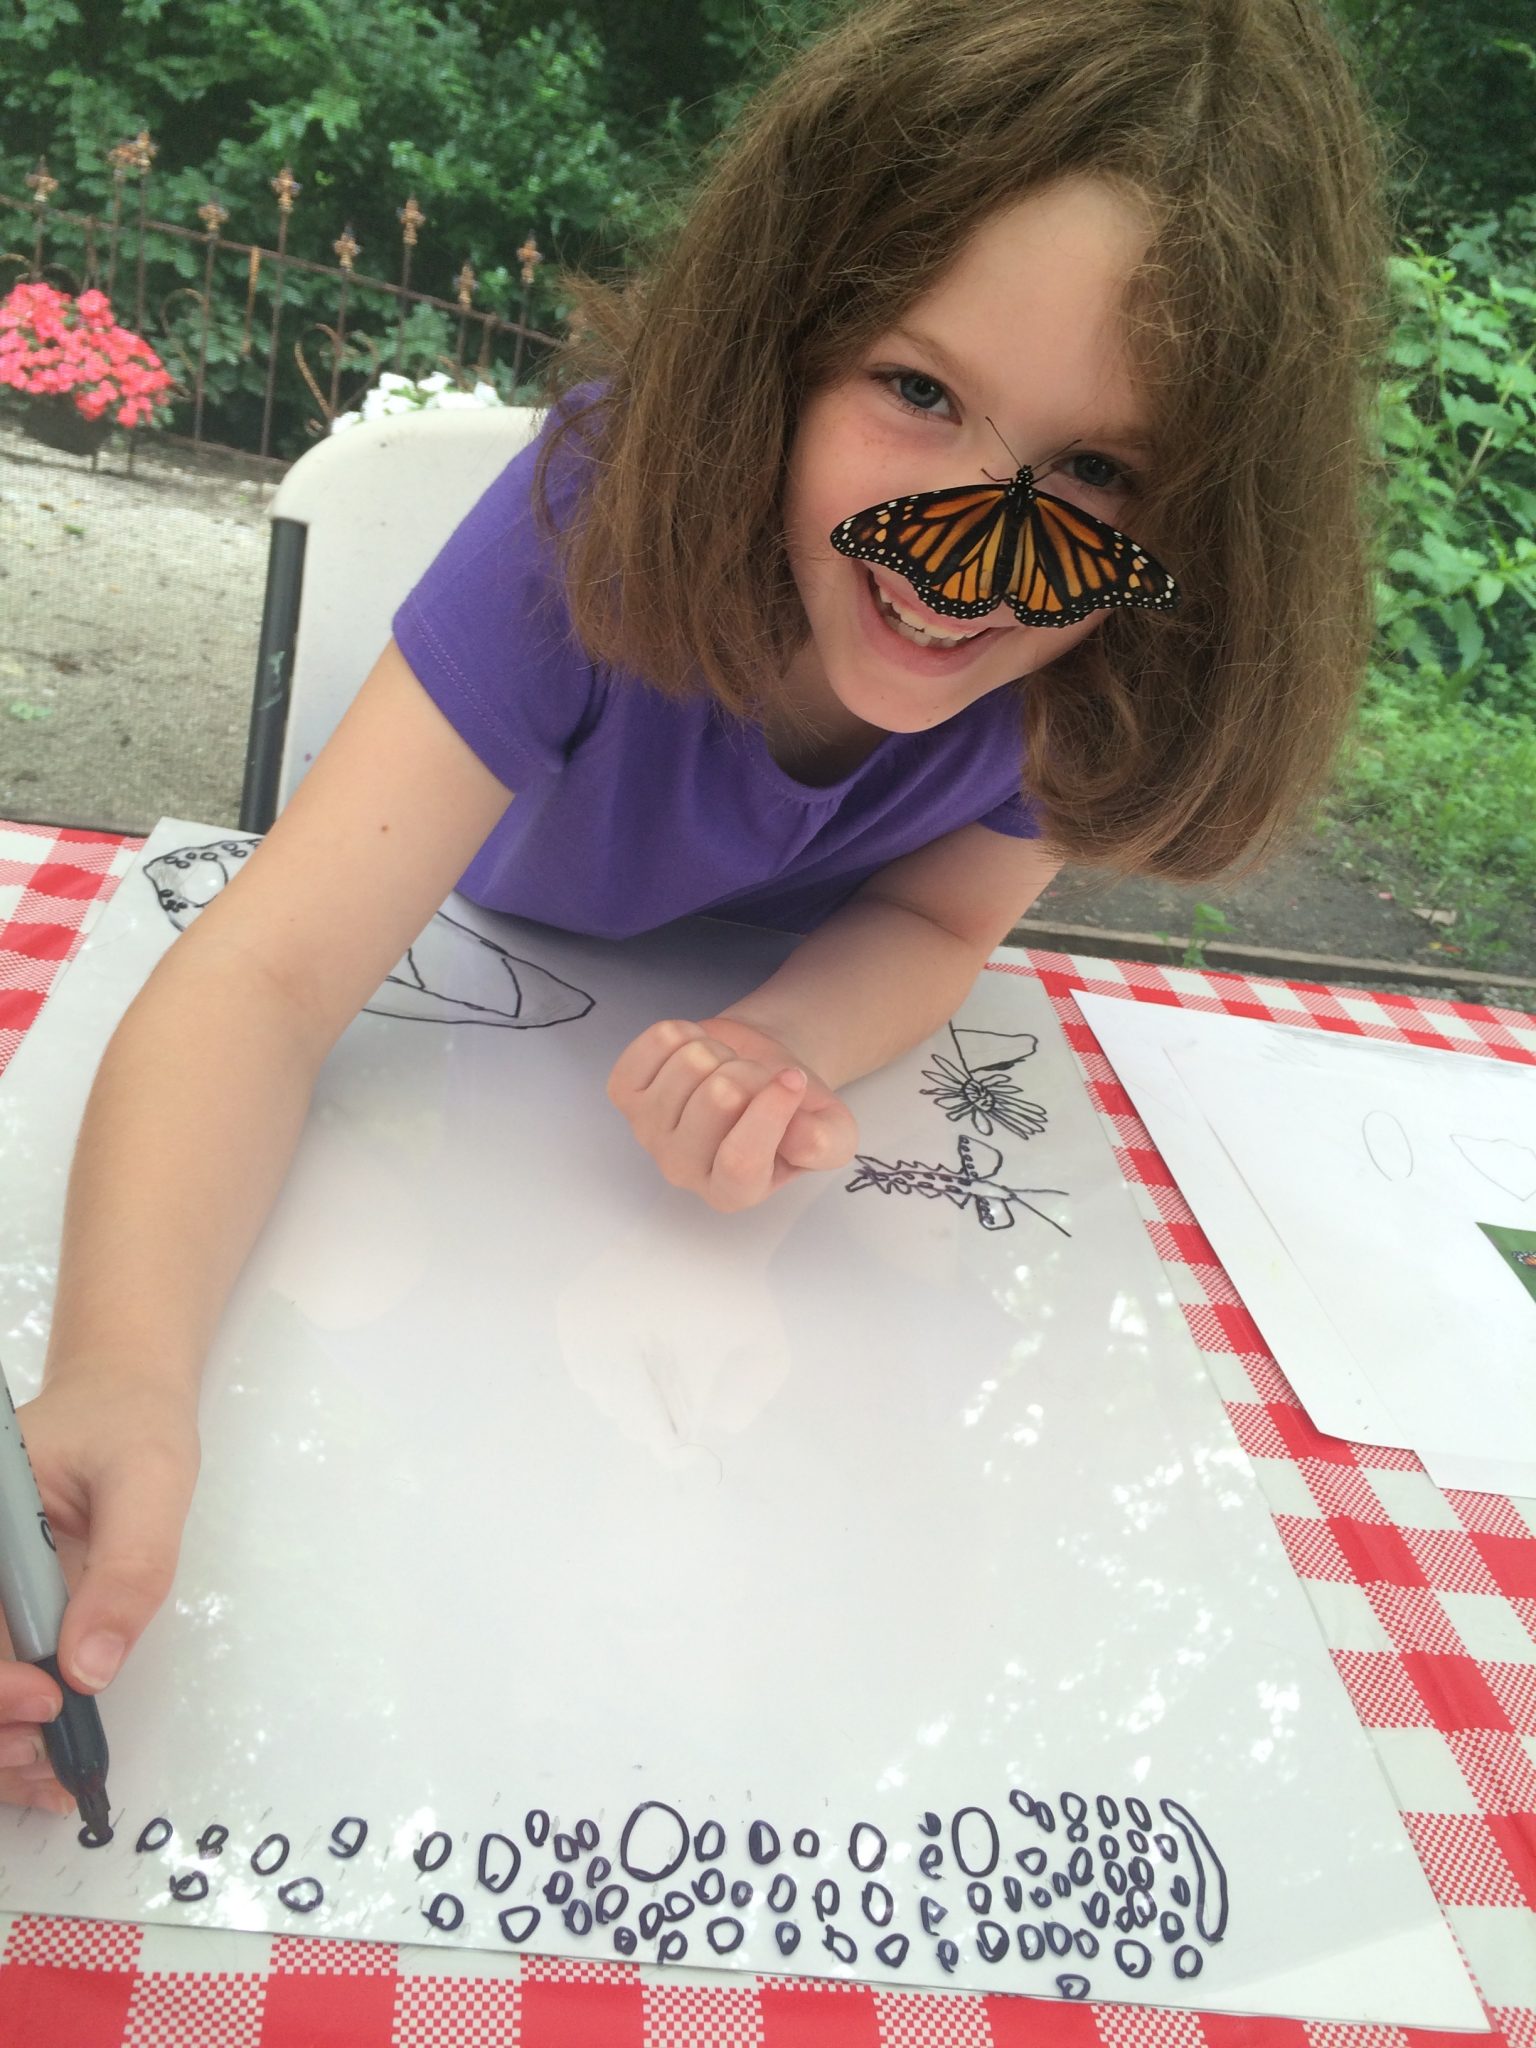 A young girl coloring with a butterfly on her face.